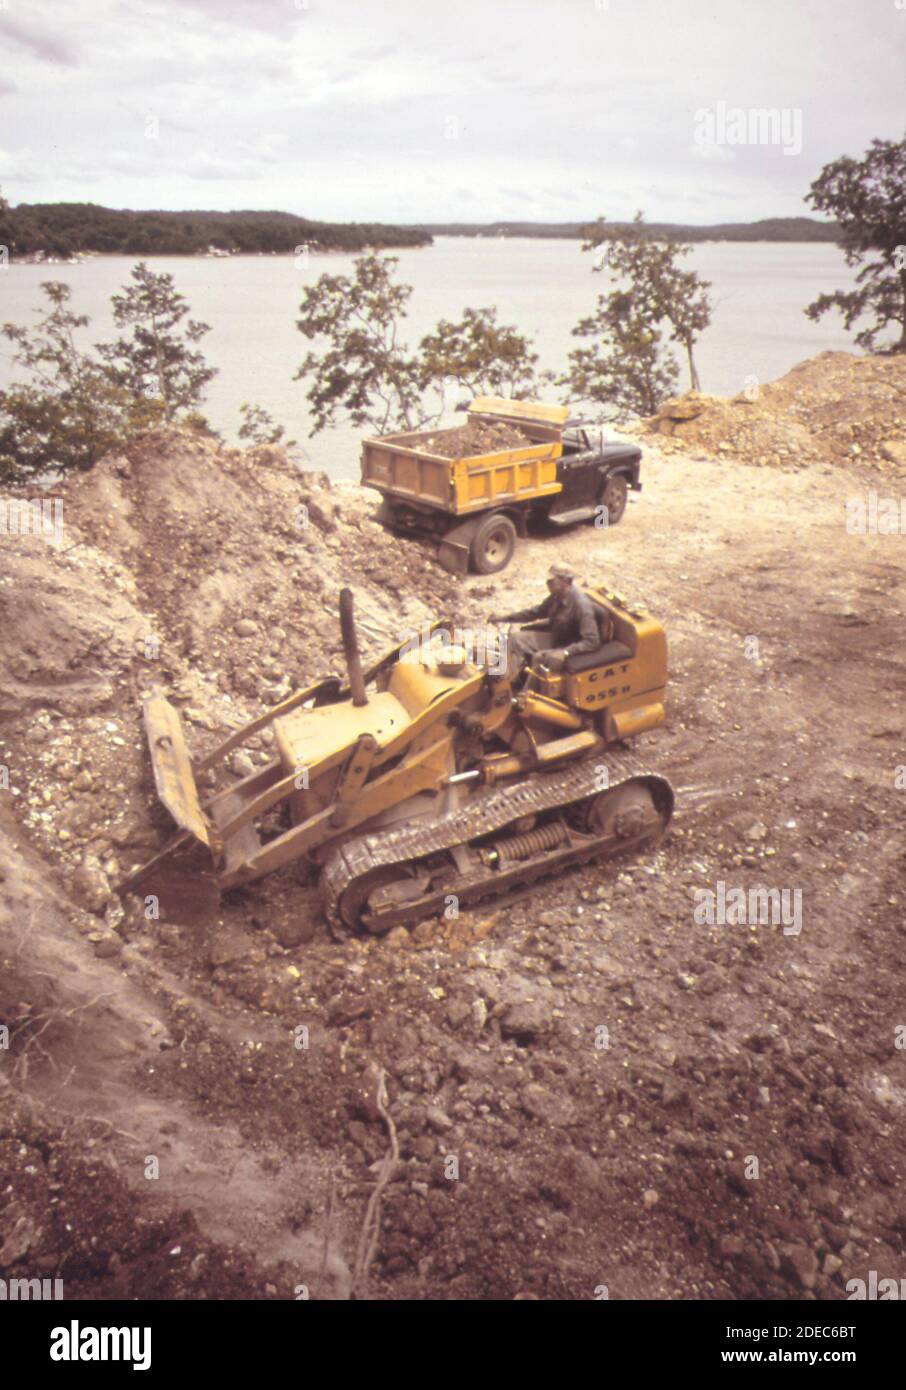 1970s Photos (1973) -  Digging foundations for a home directly above lake at Sunrise Beach on the Lake of the Ozarks. The land here falls off steeply to the shore; and this degree of soil disturbance increases likelihood of erosion  (Lake of the Ozarks Missouri area) Stock Photo